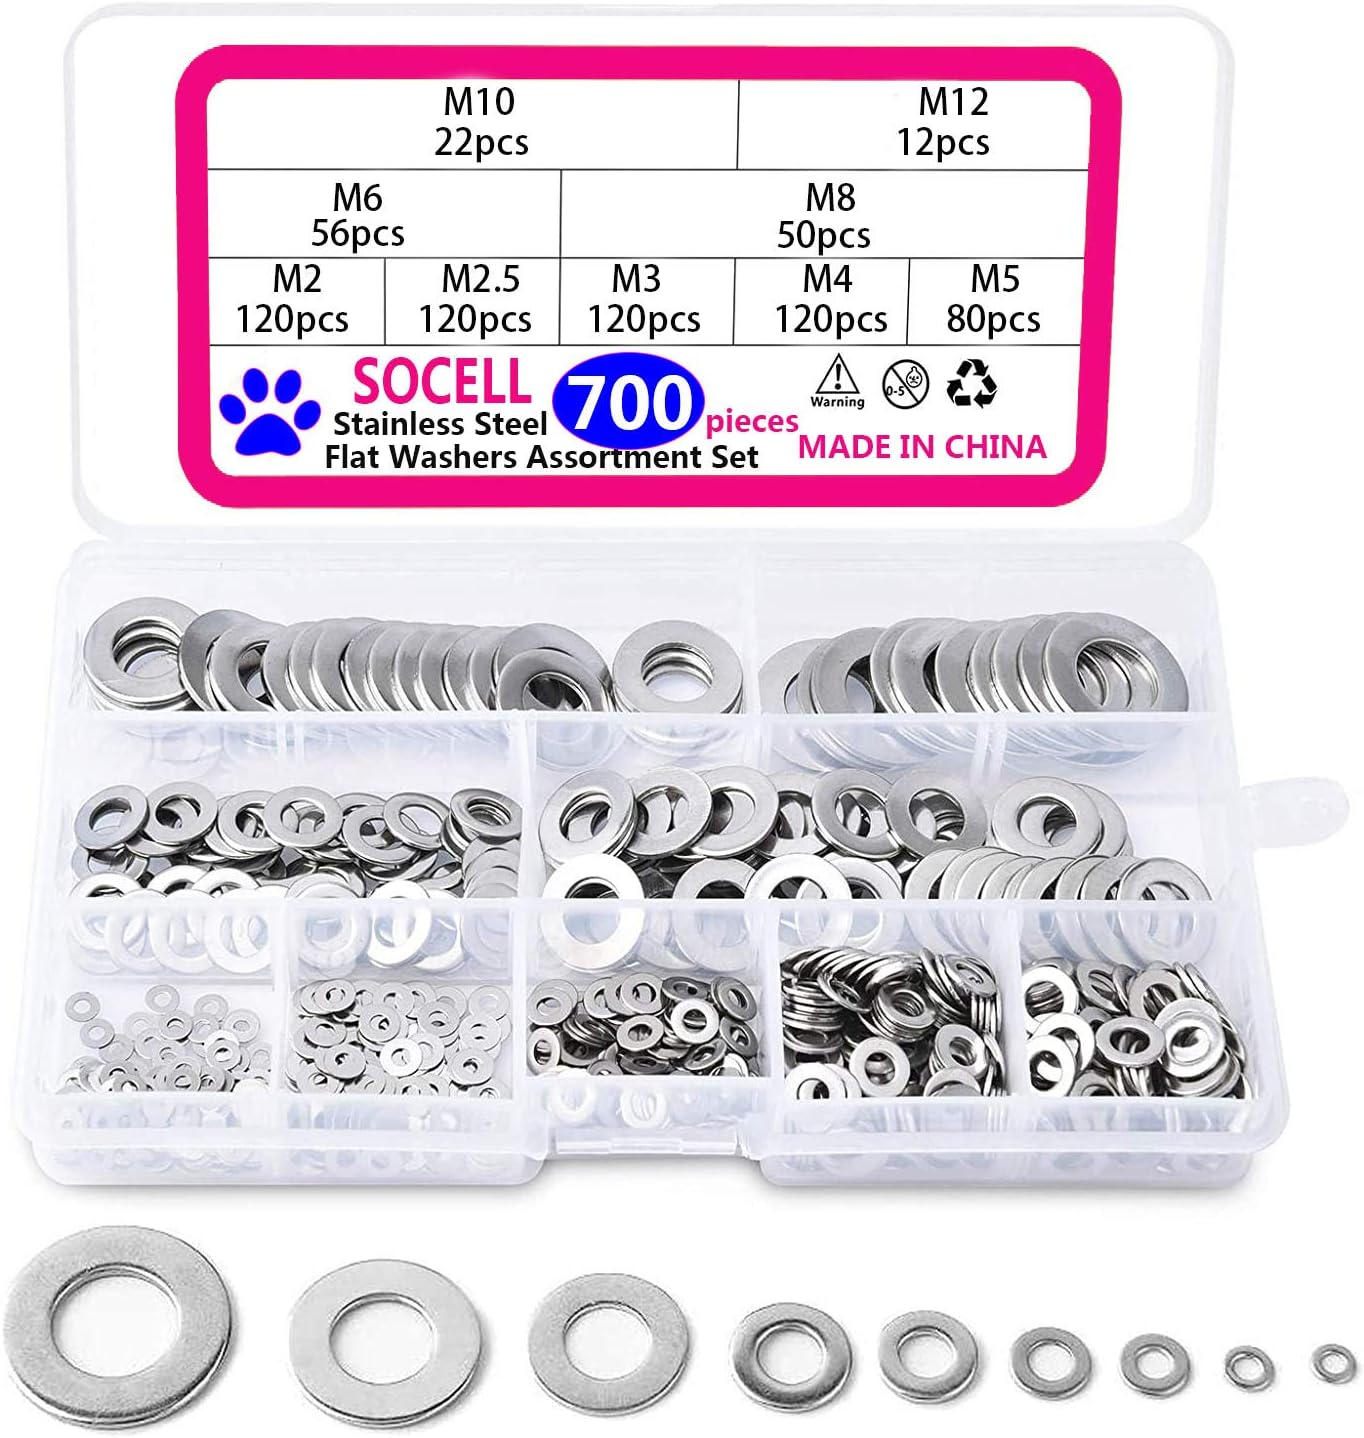 M2 M2.5 M3 M4 for sale online Sutemribor 304 Stainless Steel Flat Washers Set 580 Pcs 9 Sizes 